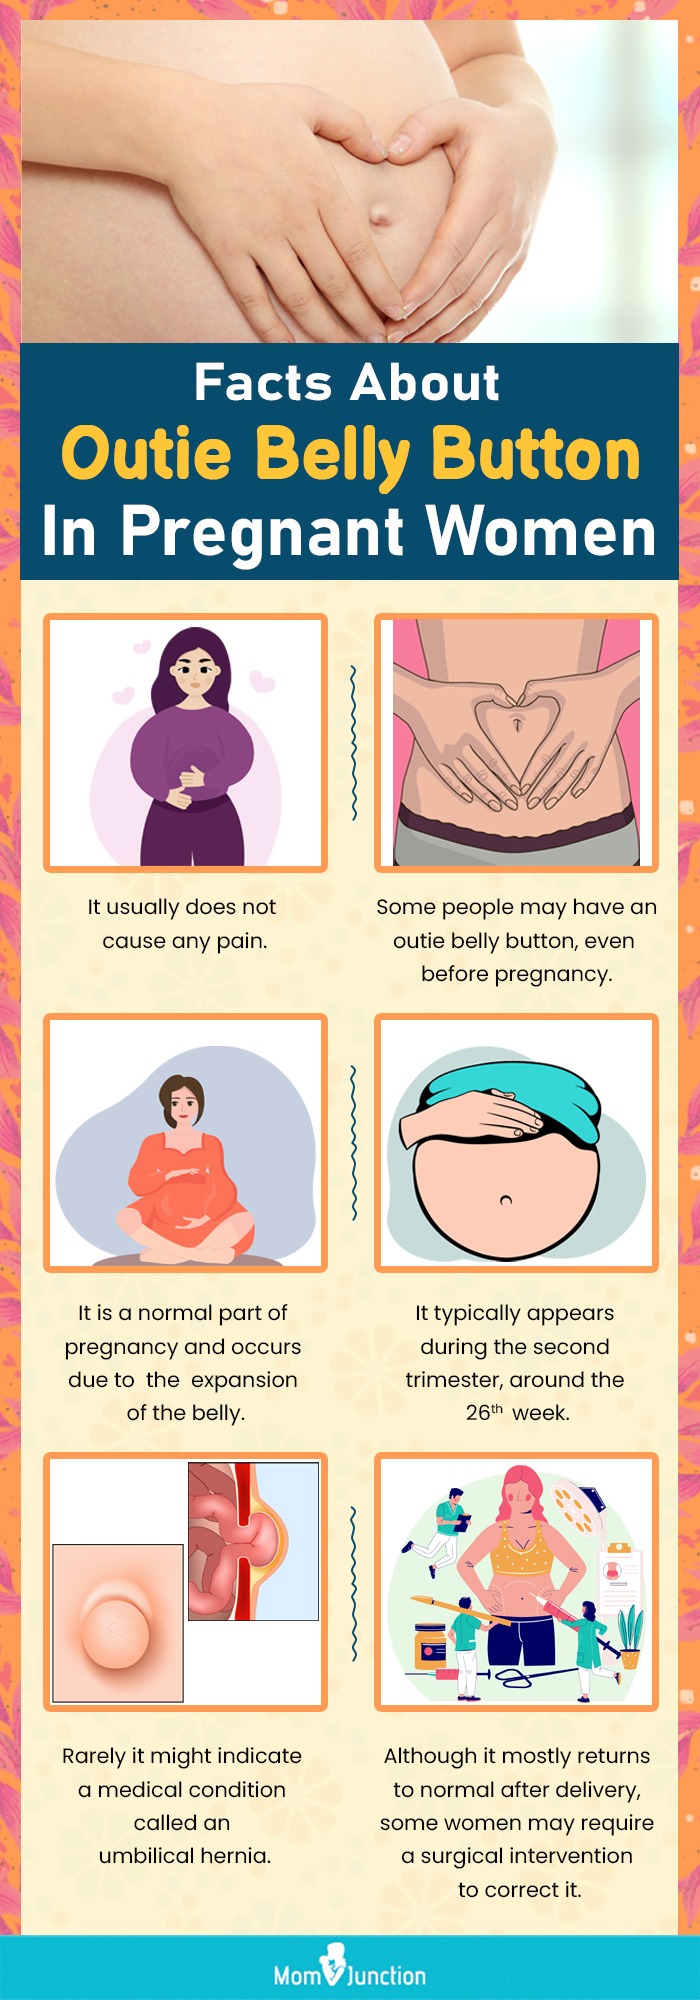 facts about outie belly button in pregnant women (infographic)